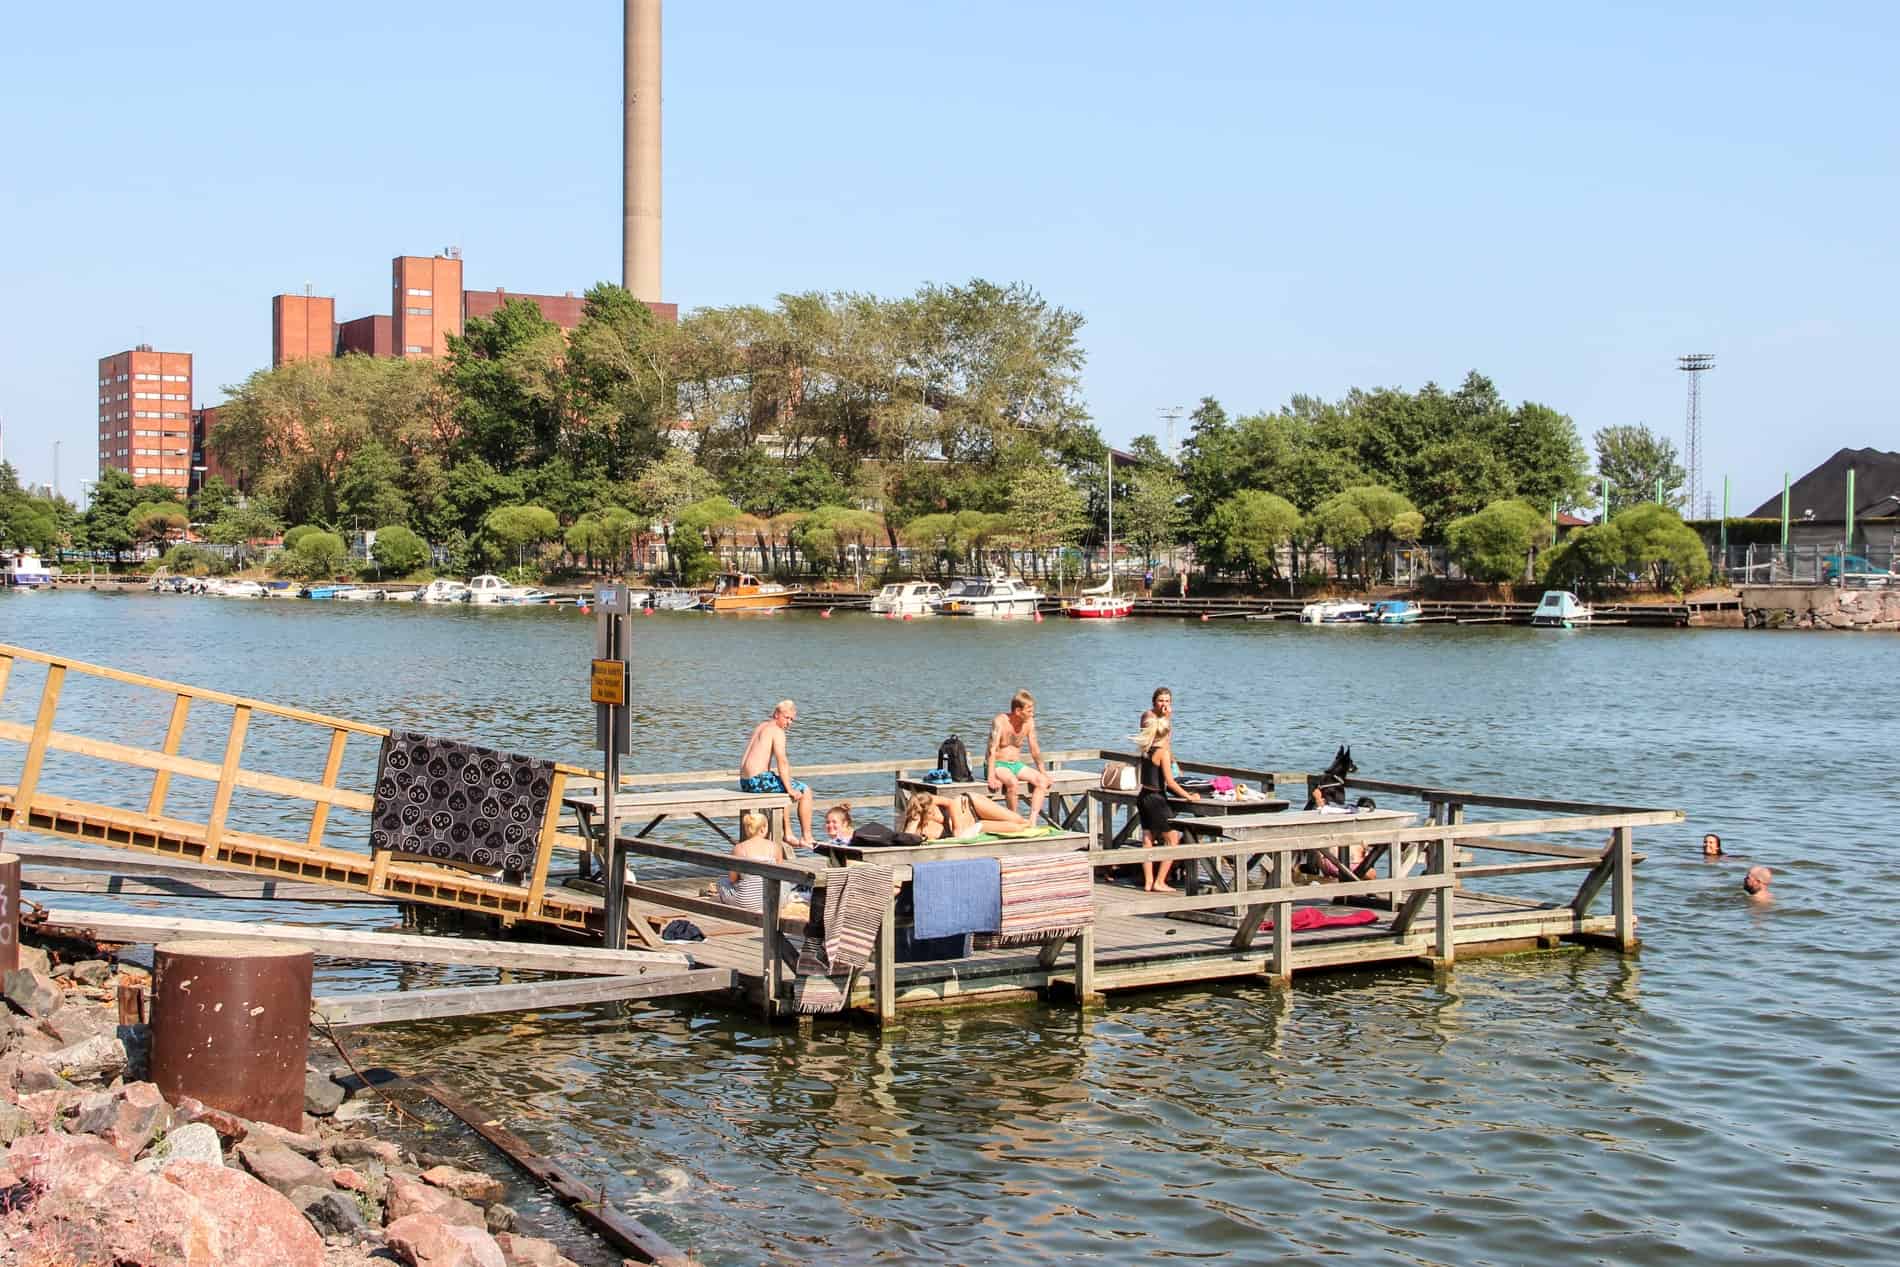 A group of people bathing and rugs drying on a jetty in the waterside area of Merihaka in Helsinki. 